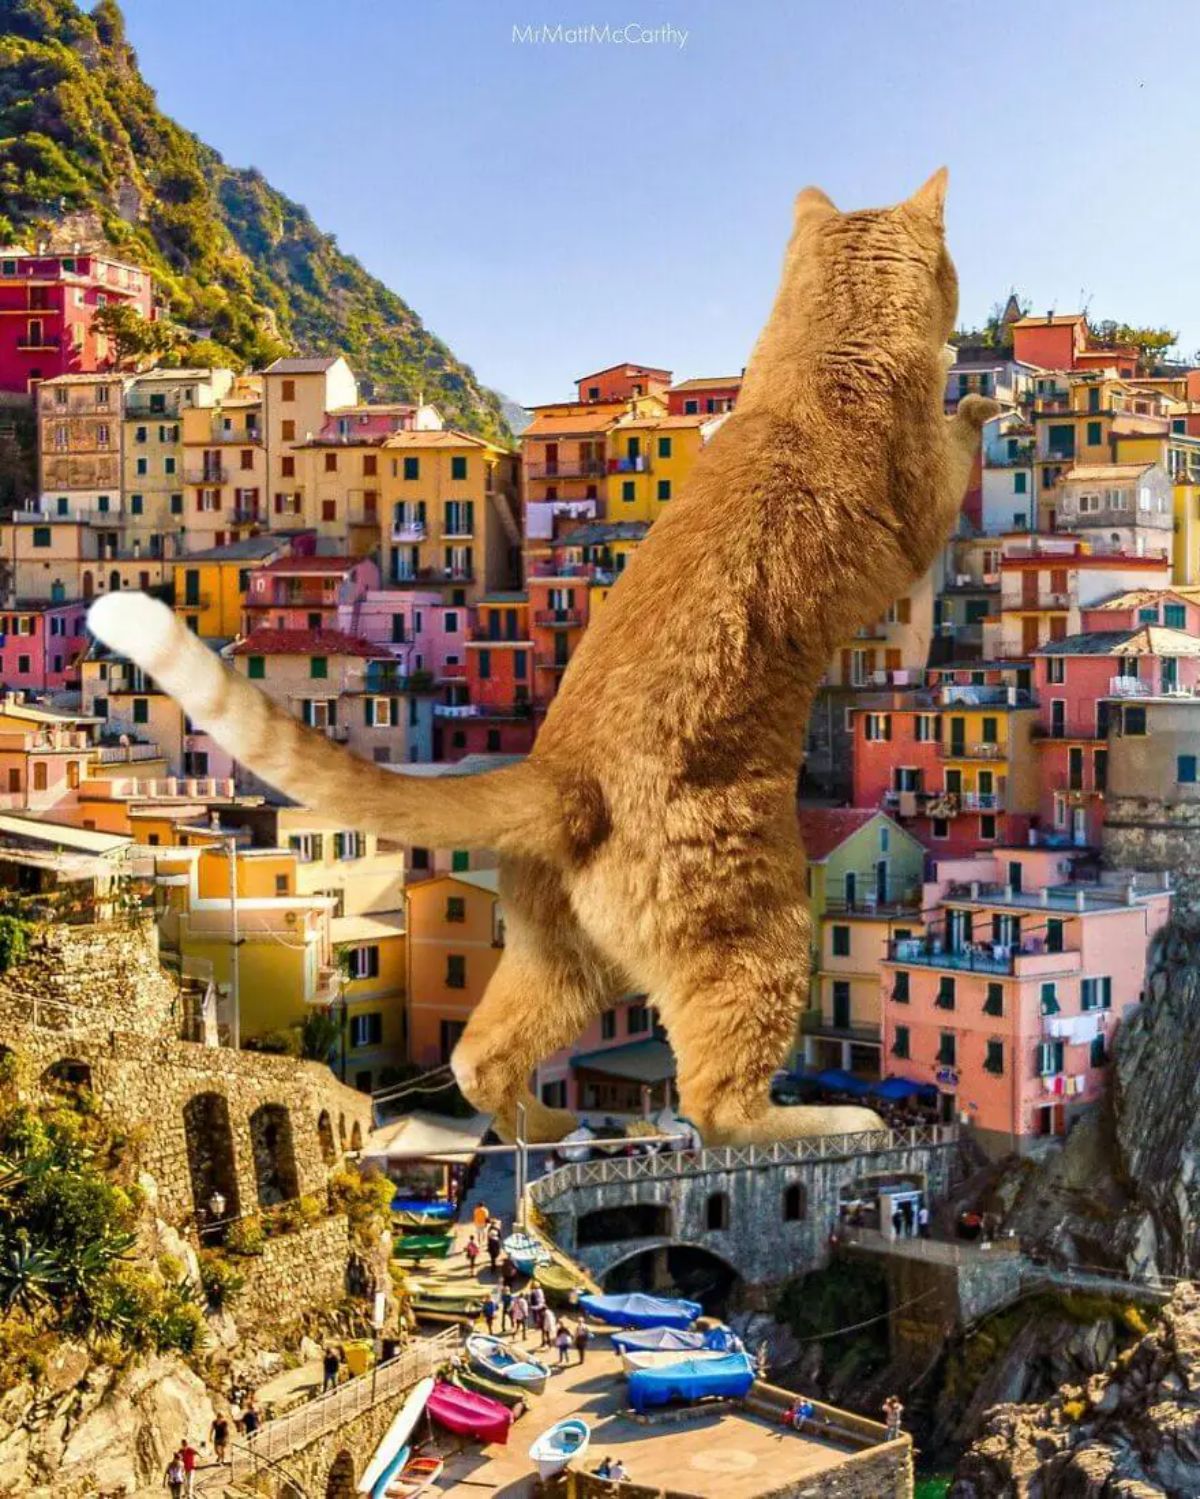 large photoshopped orange cat standing on hind legs amid a town of colourful houses